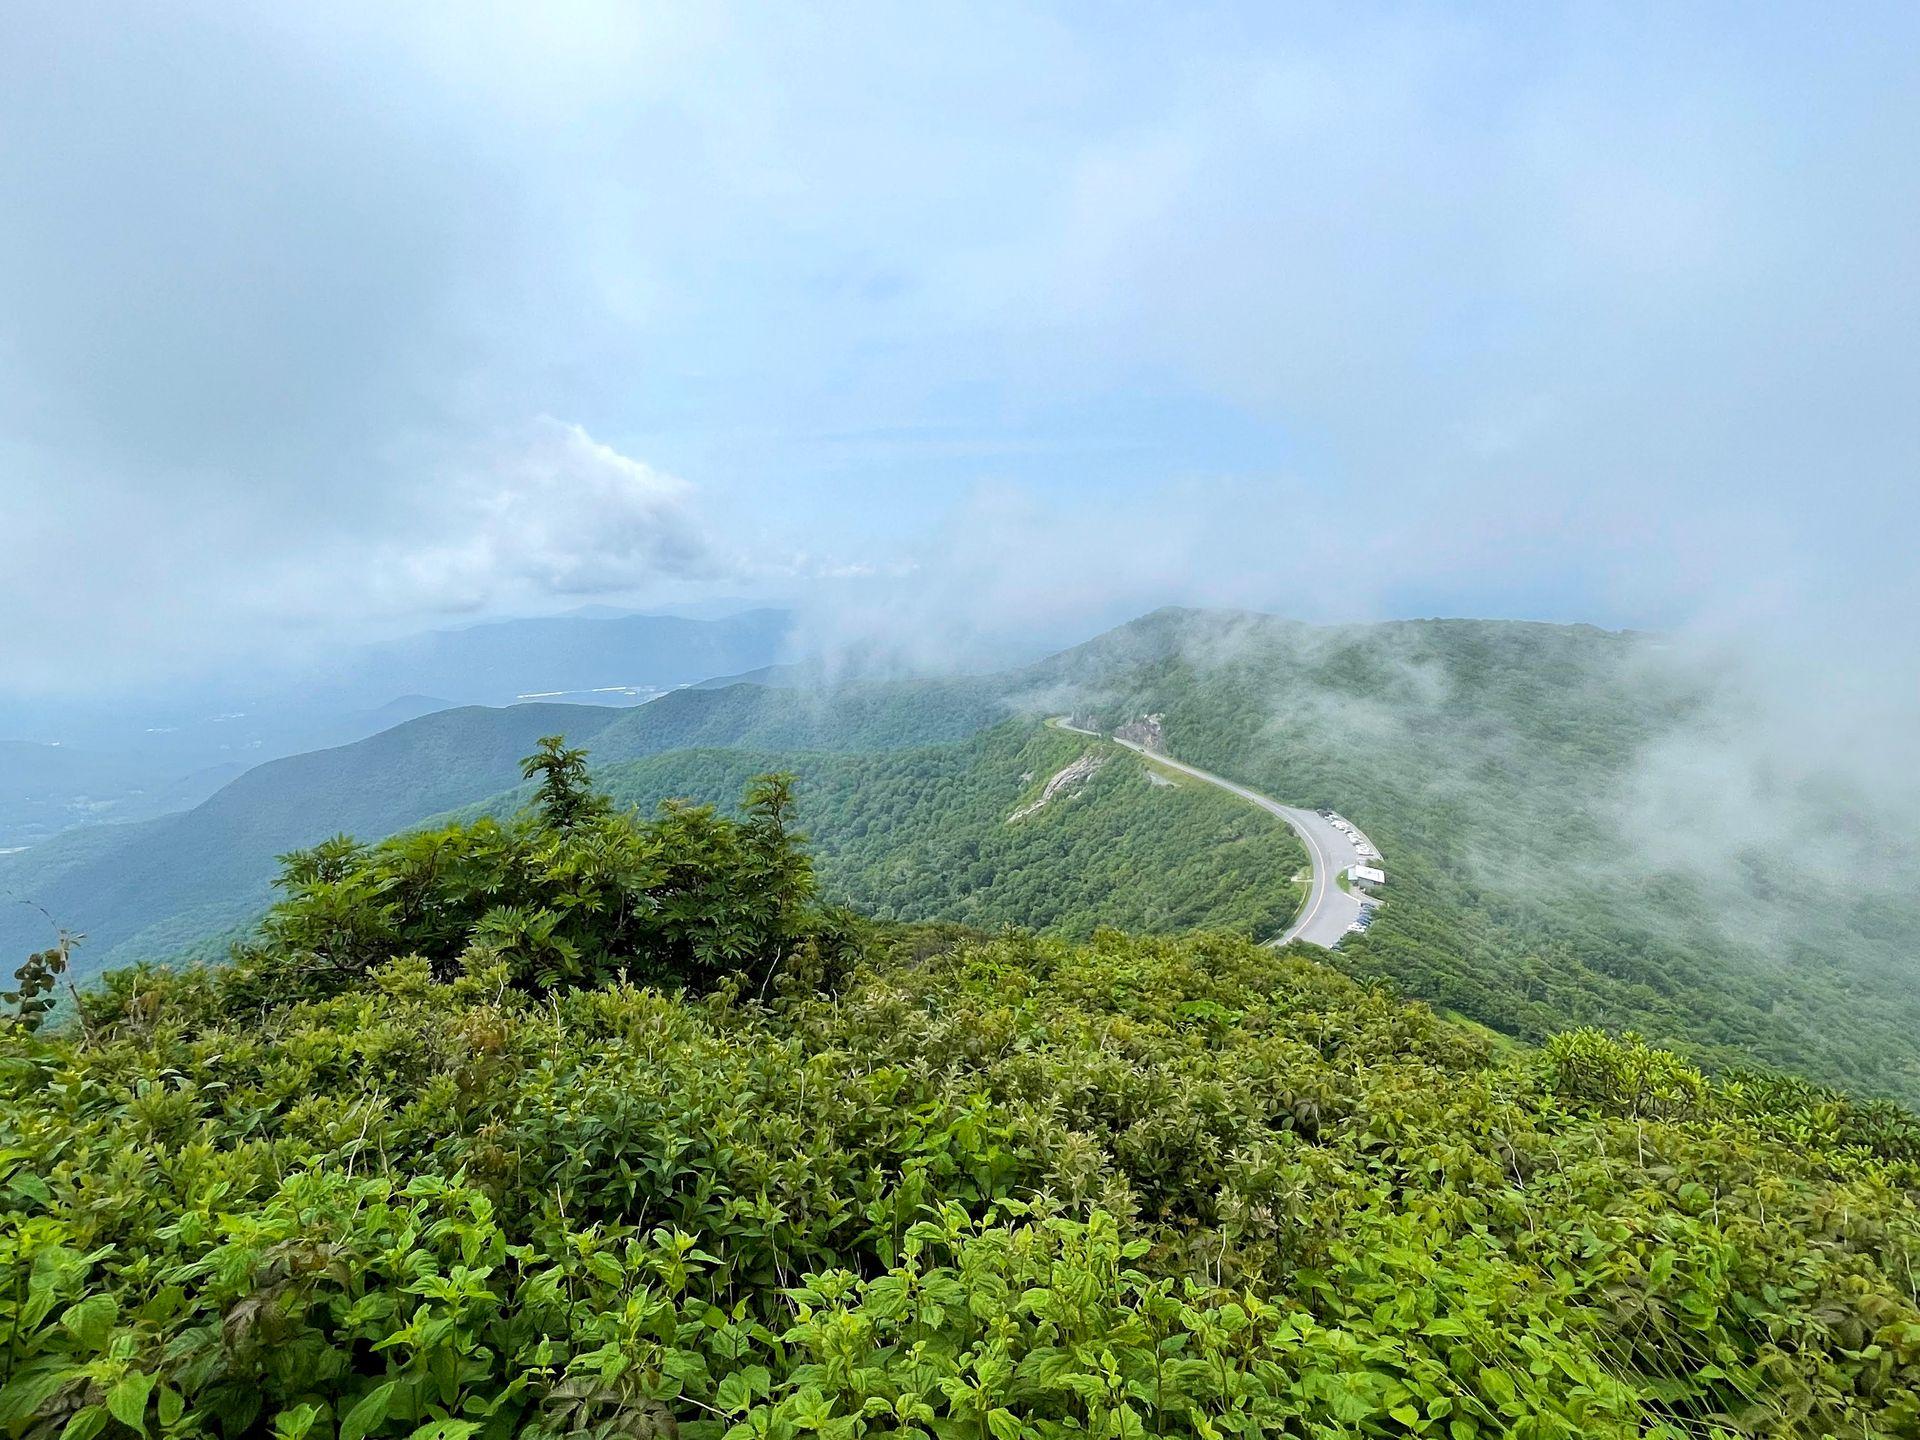 A view from above the Blue Ridge Parkway with a bit of fog clinging to the mountains.